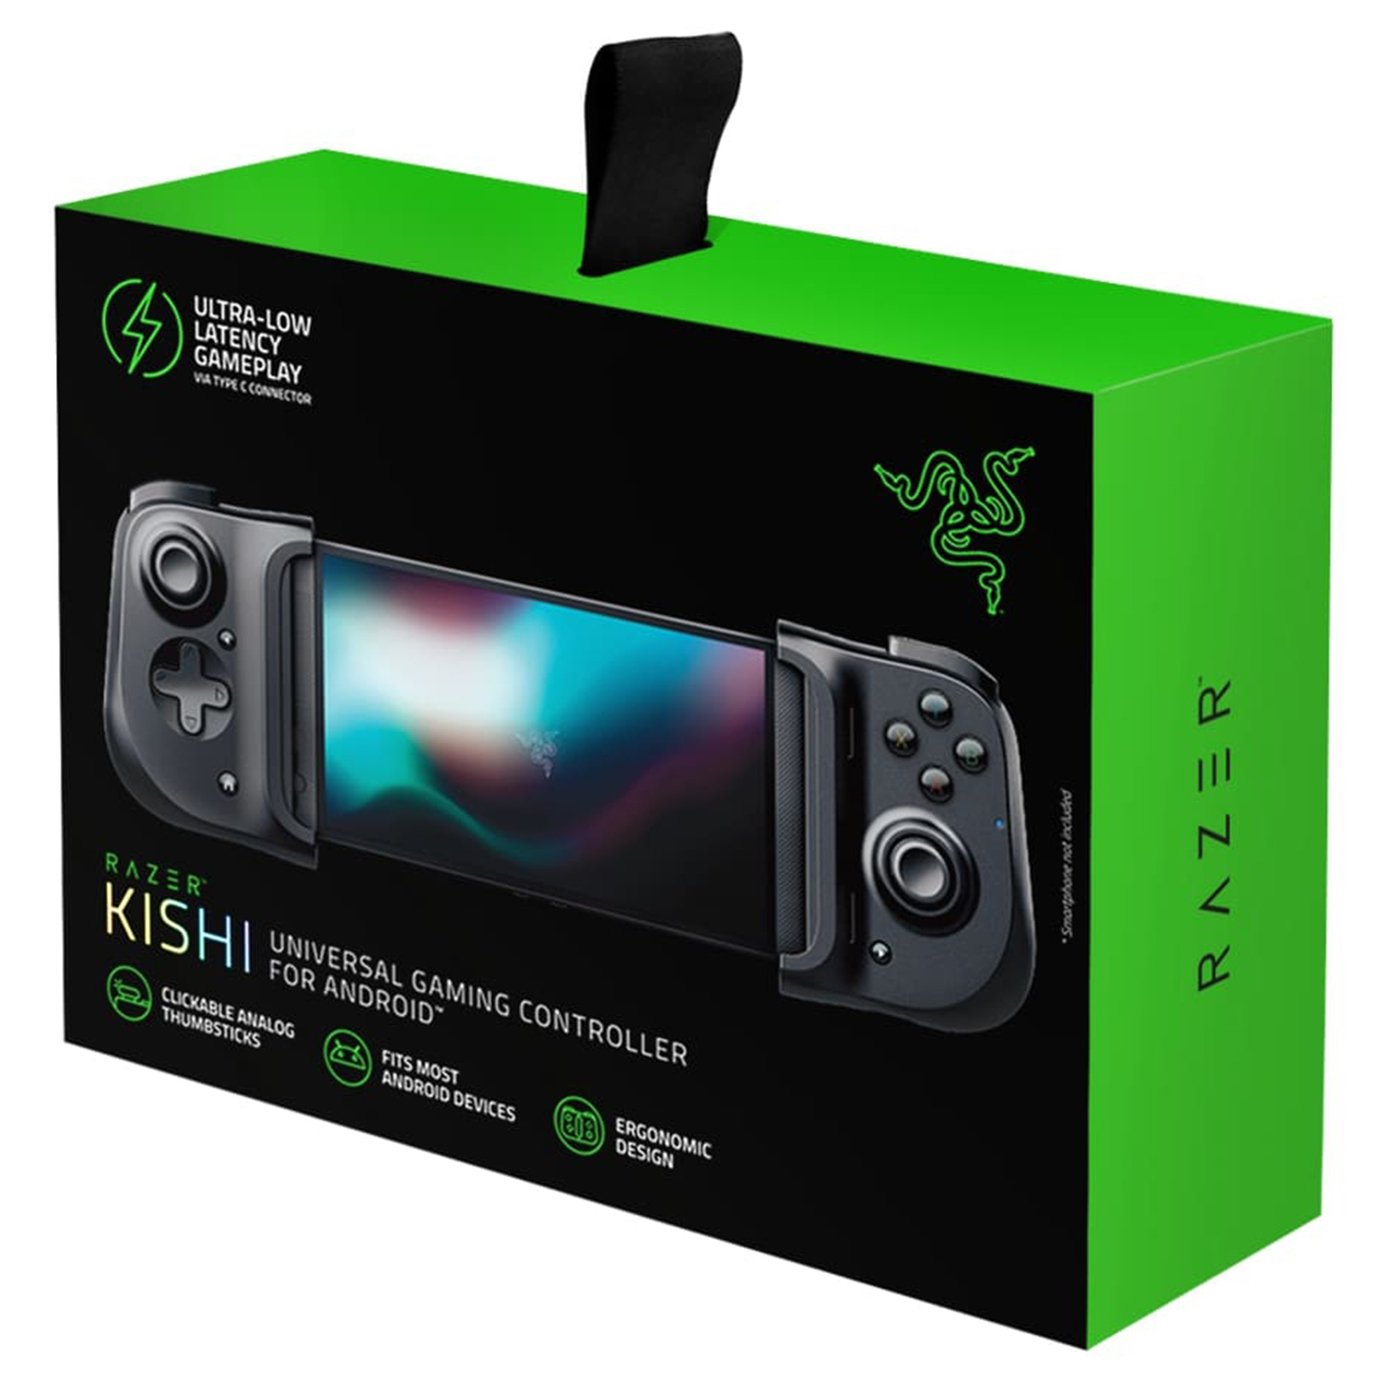 Razer Kishi for Android Universal Mobile Gaming Controller Review